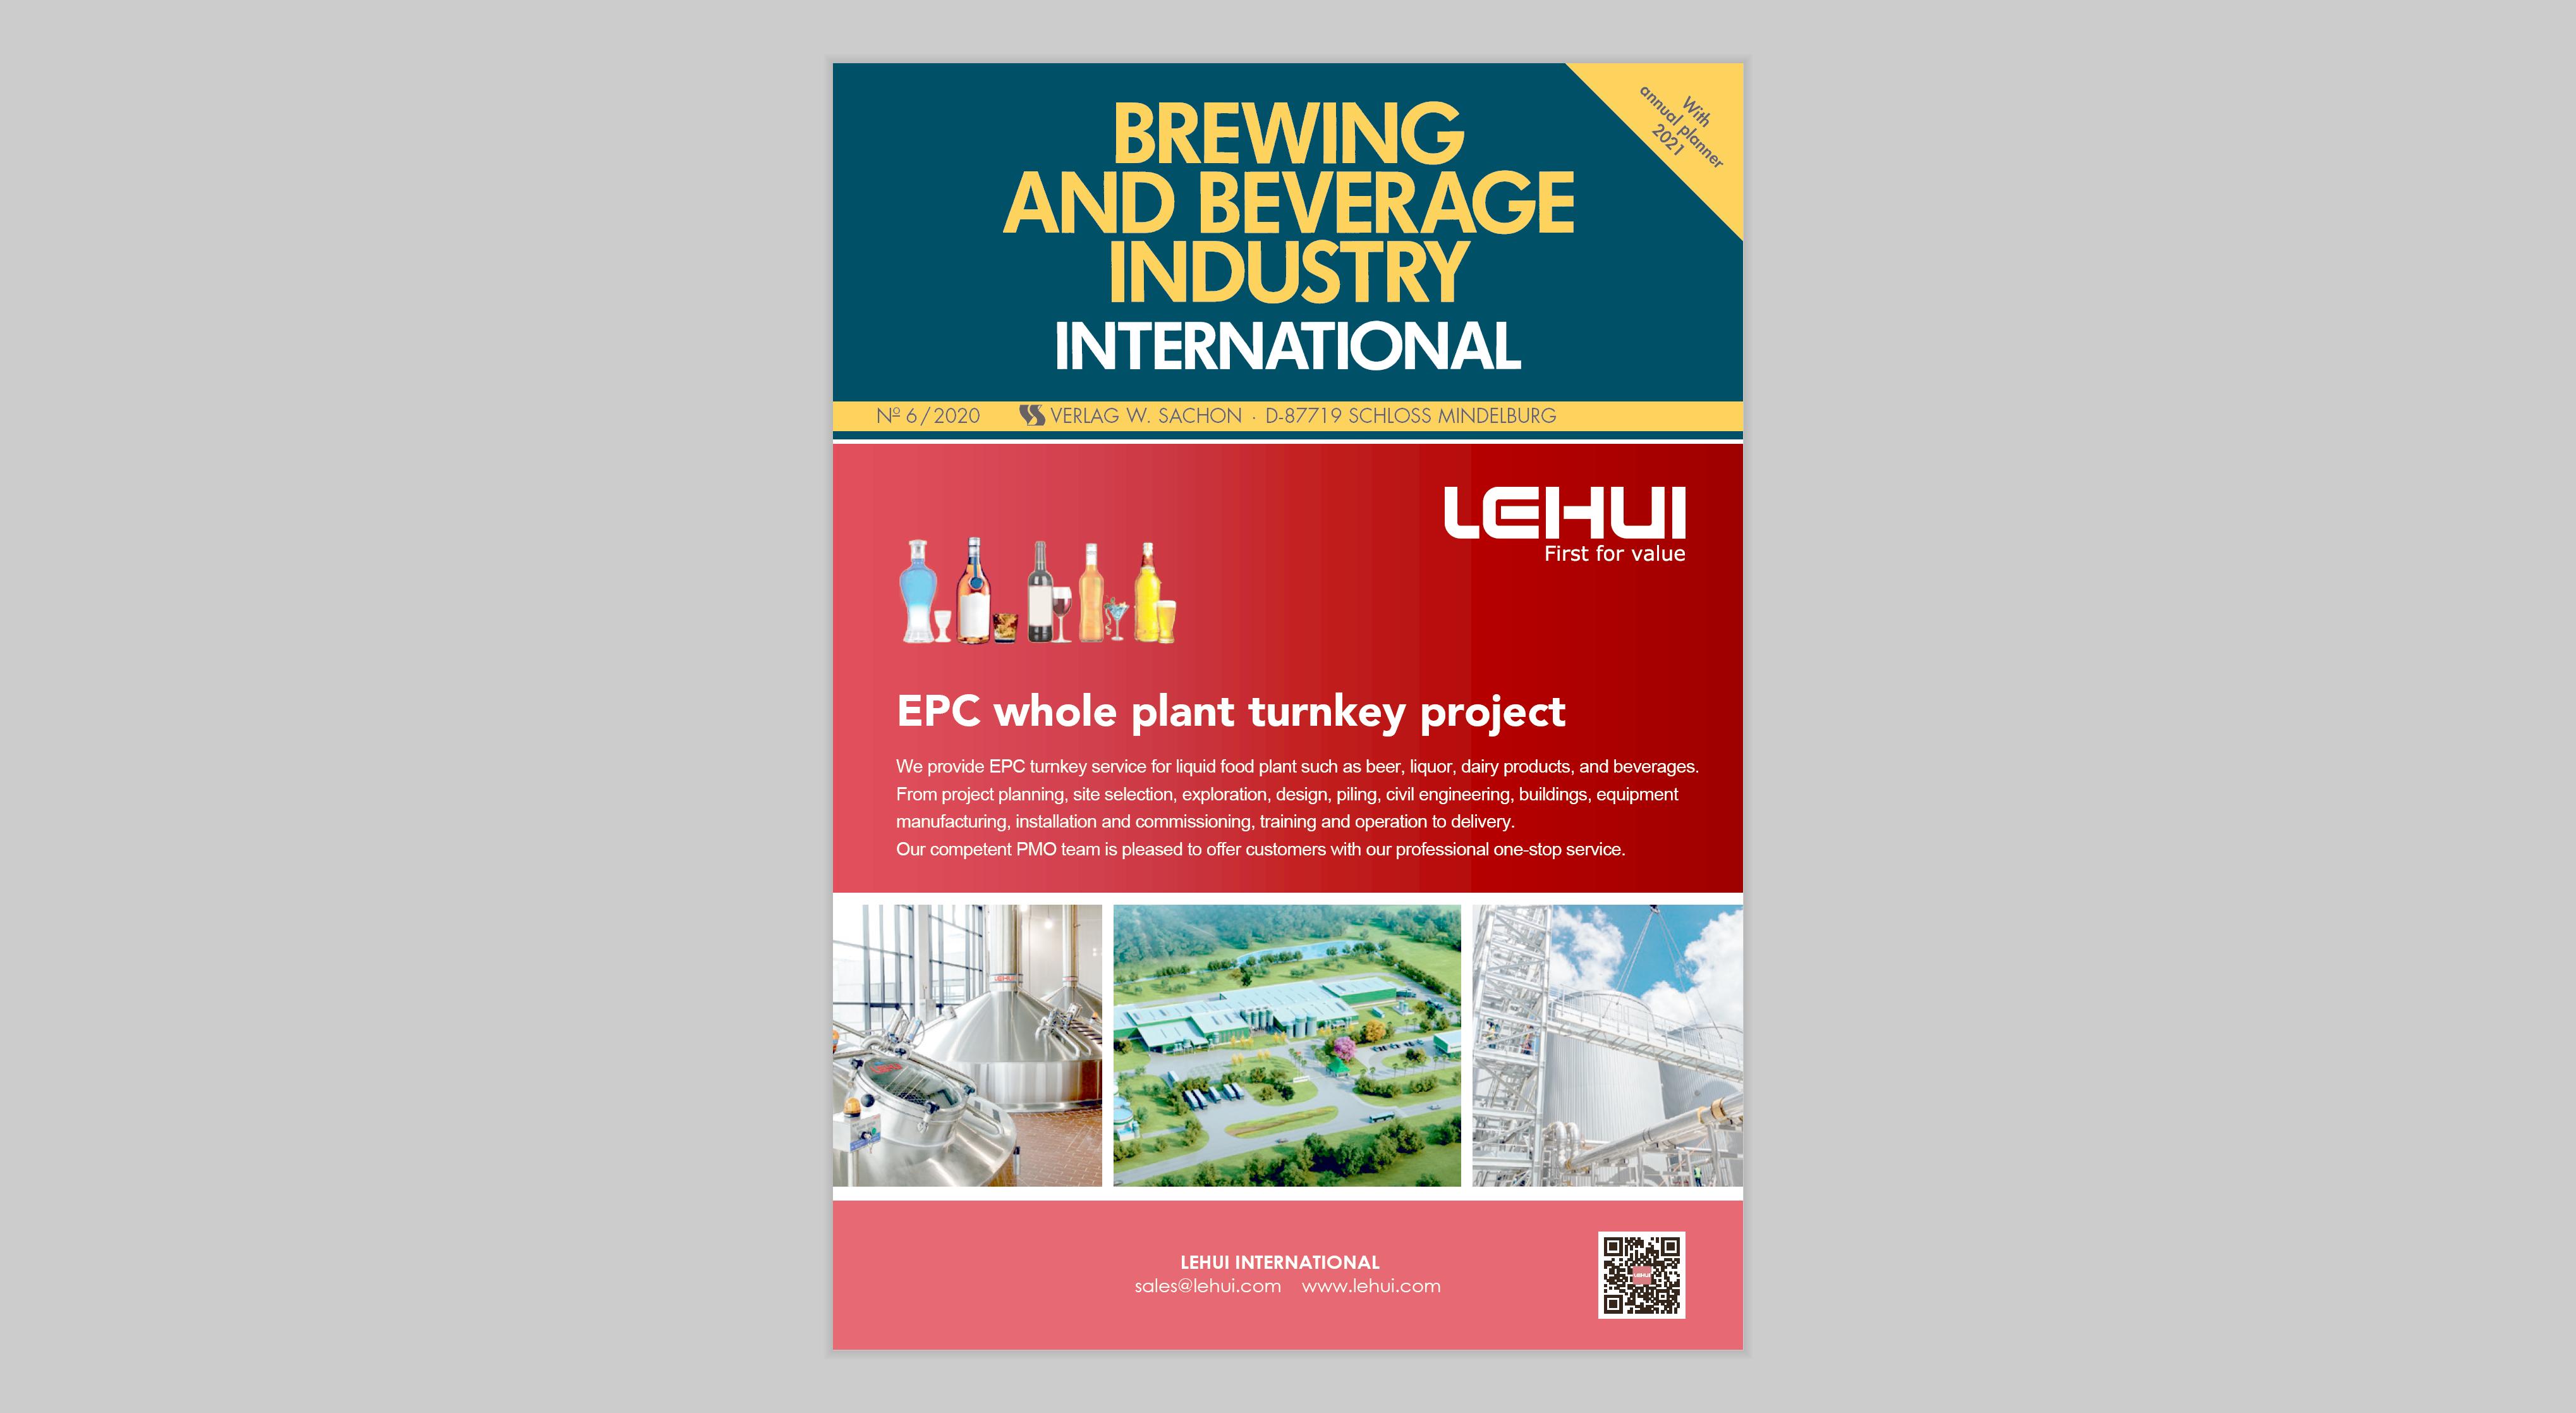 Brewing and Beverage Industry International_6-20